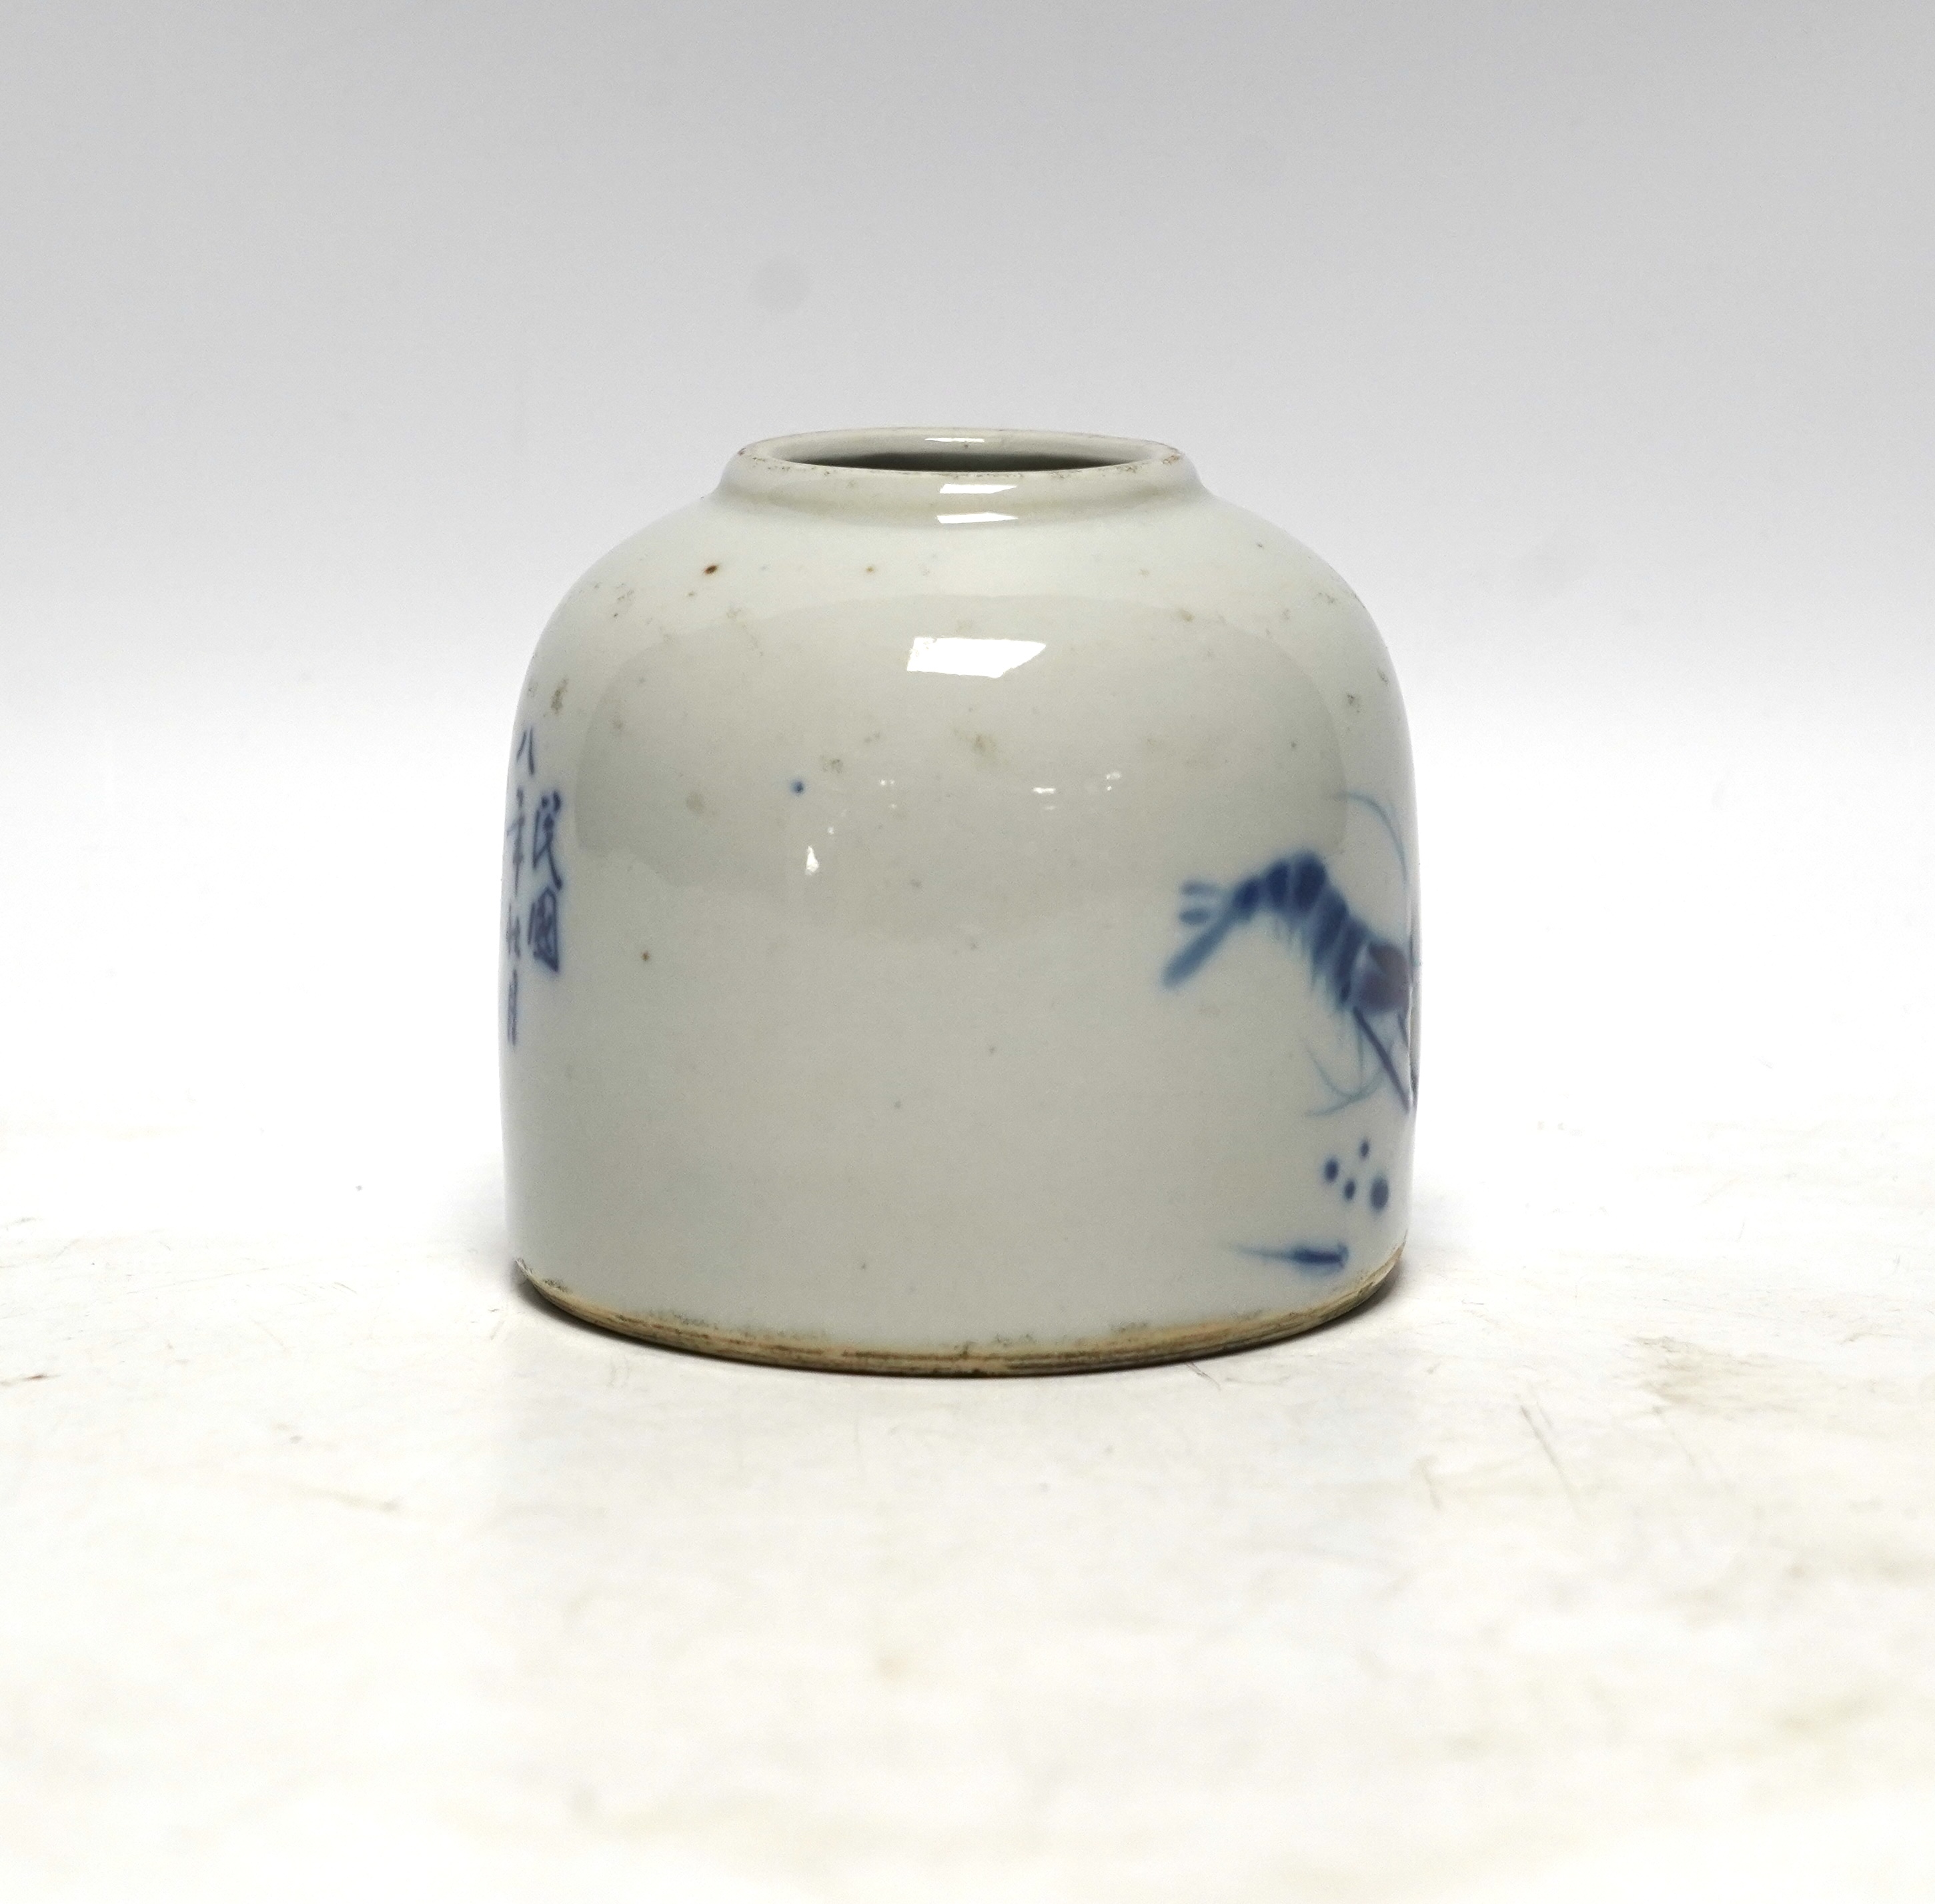 A Chinese blue and white brush pot, possibly Republic period, decorated with crayfish, 8.5cm